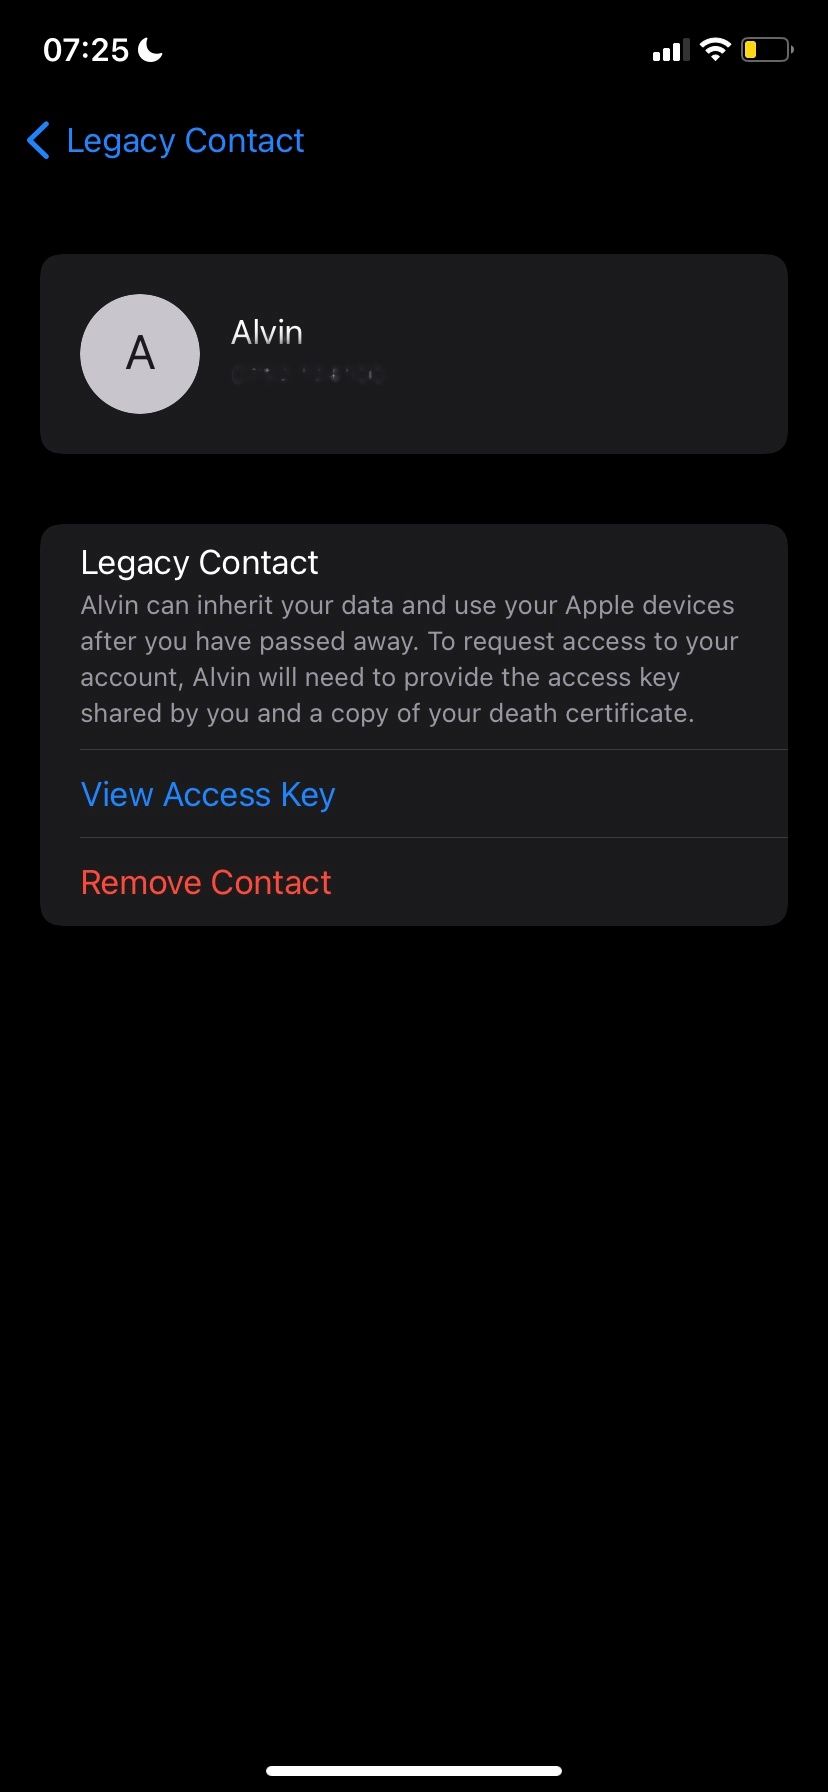 Viewing information about a Legacy Contact in iOS 15